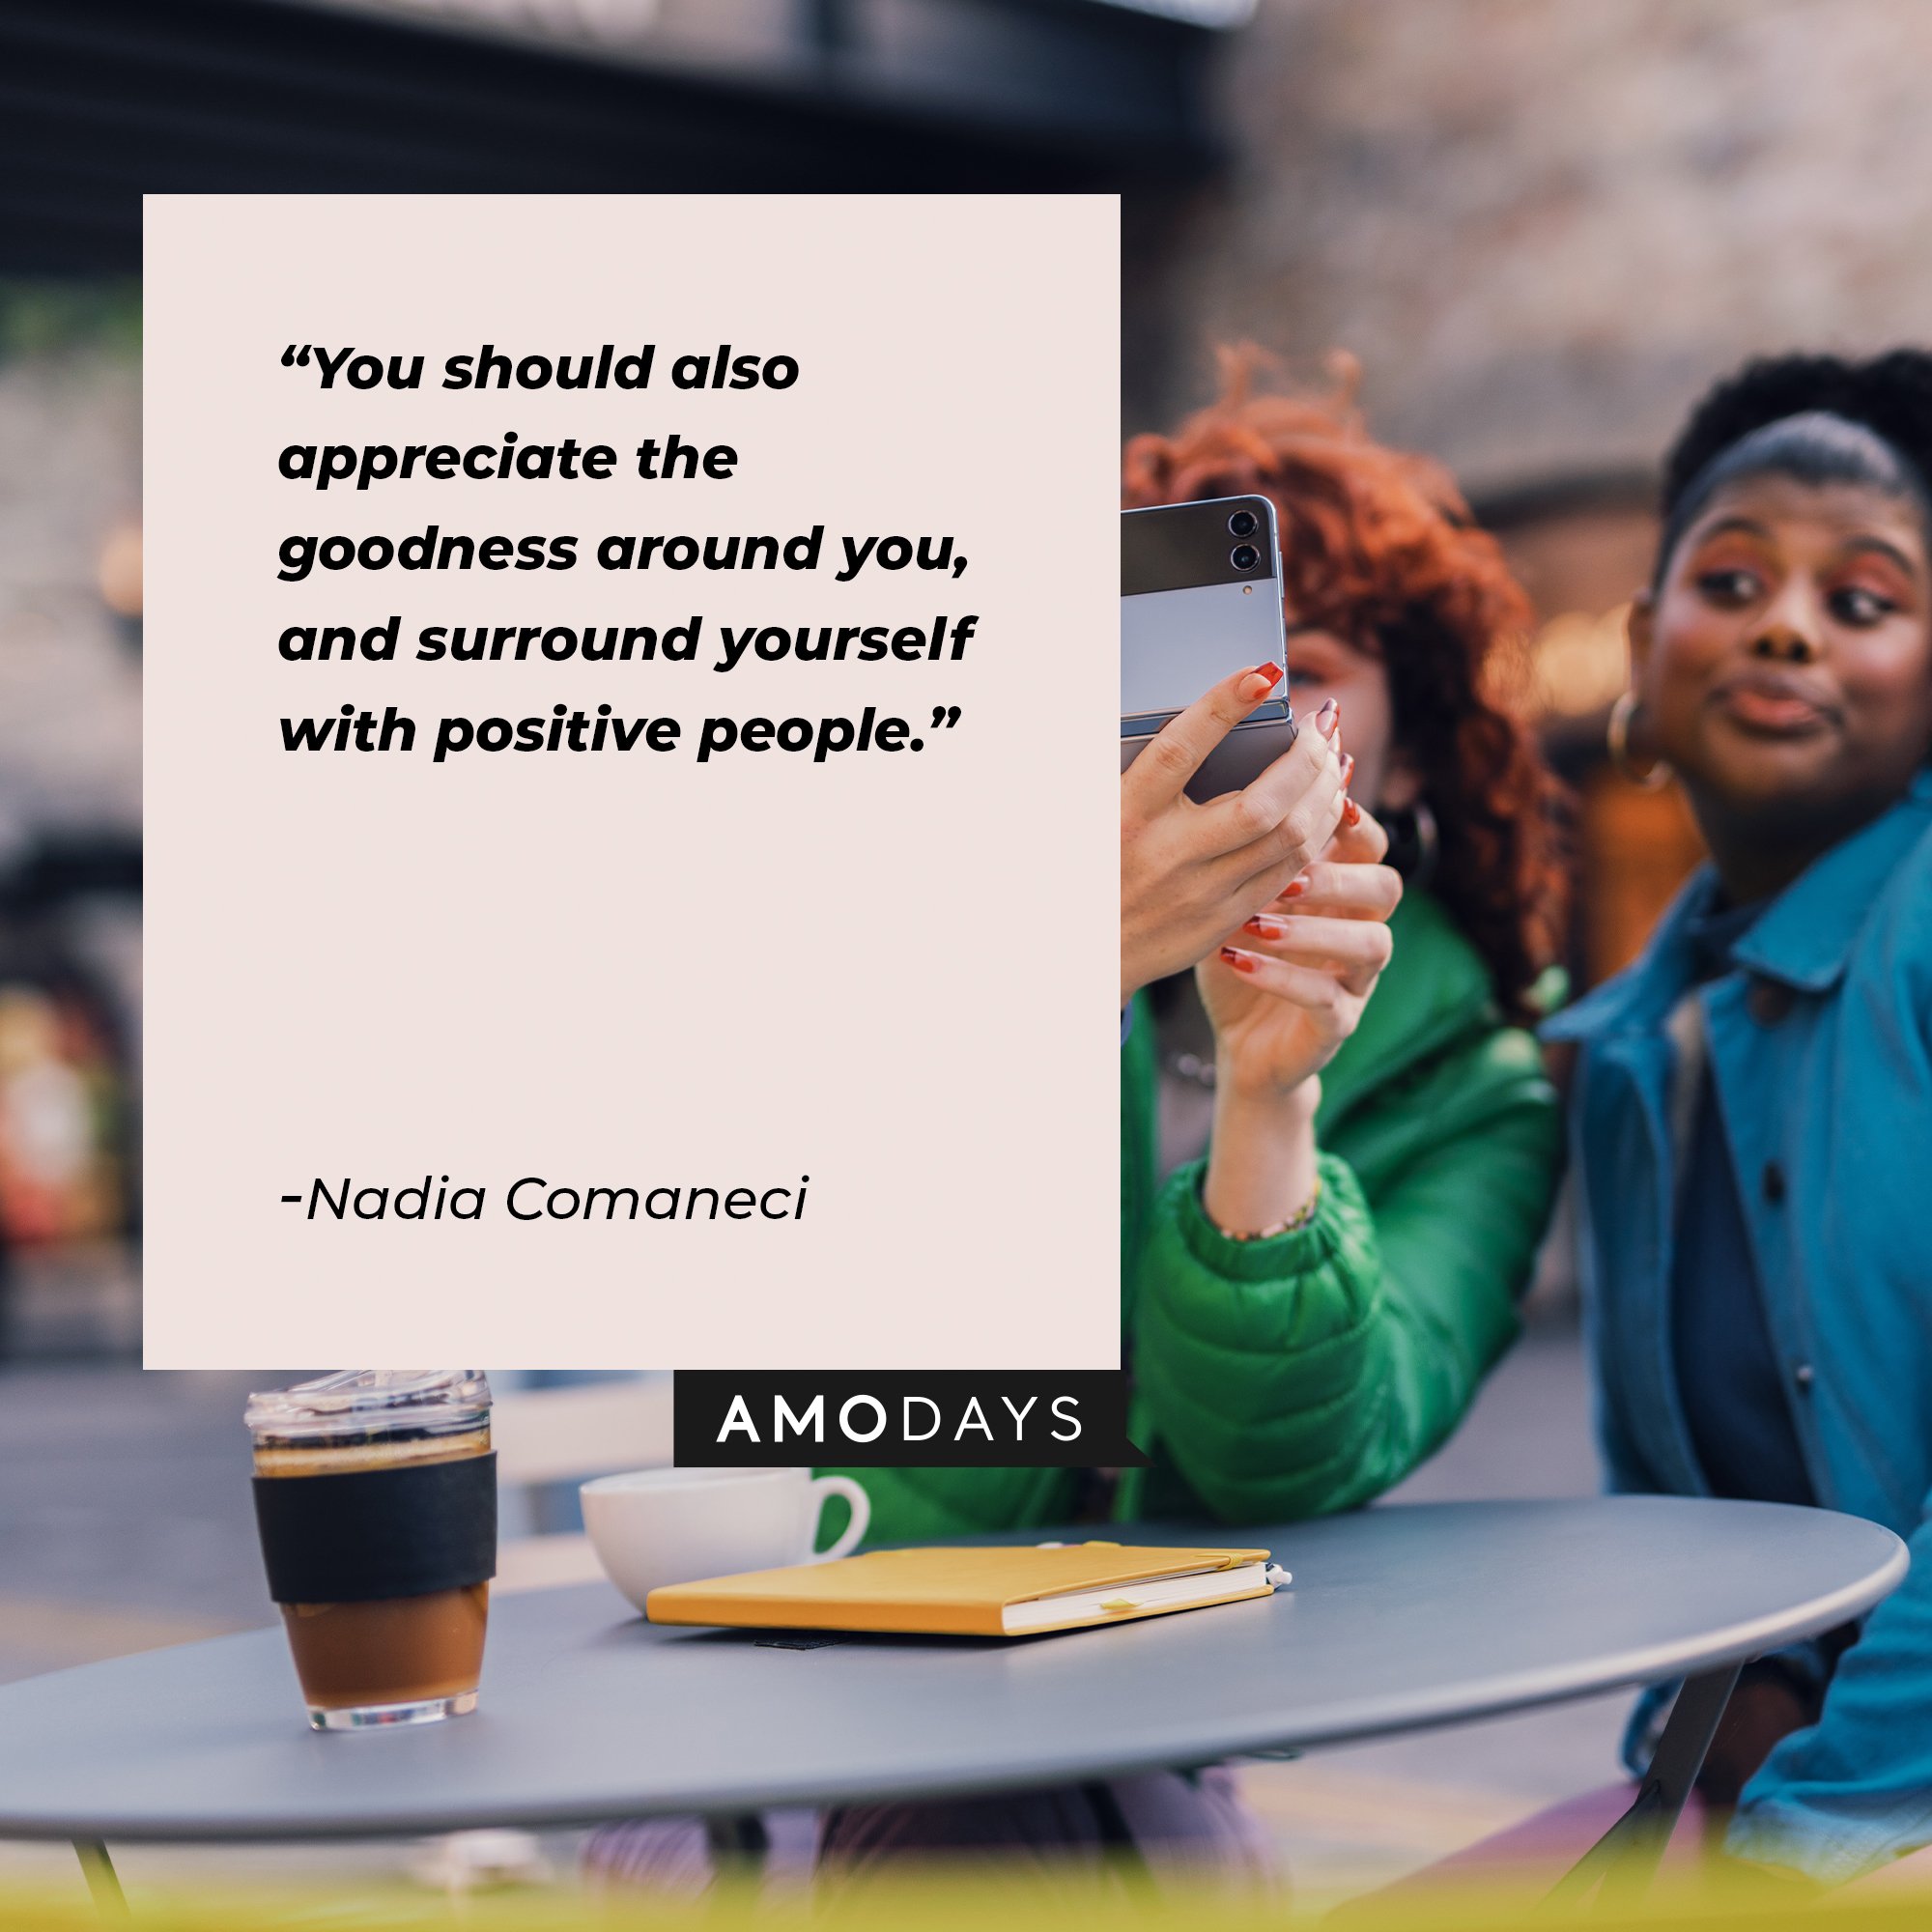 Nadia Comaneci’s quote: “You should also appreciate the goodness around you, and surround yourself with positive people.” | Image: AmoDays